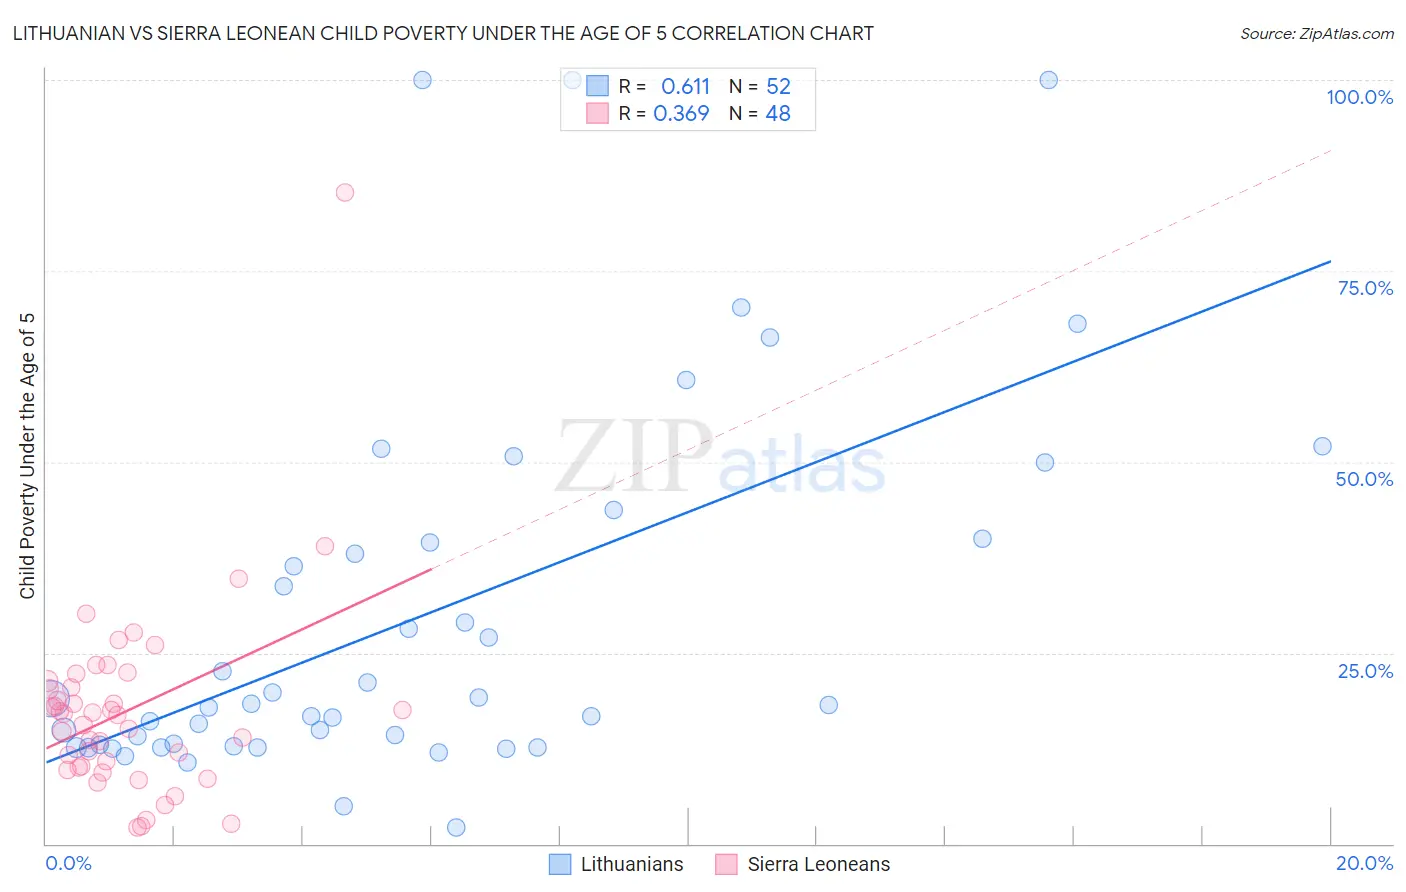 Lithuanian vs Sierra Leonean Child Poverty Under the Age of 5